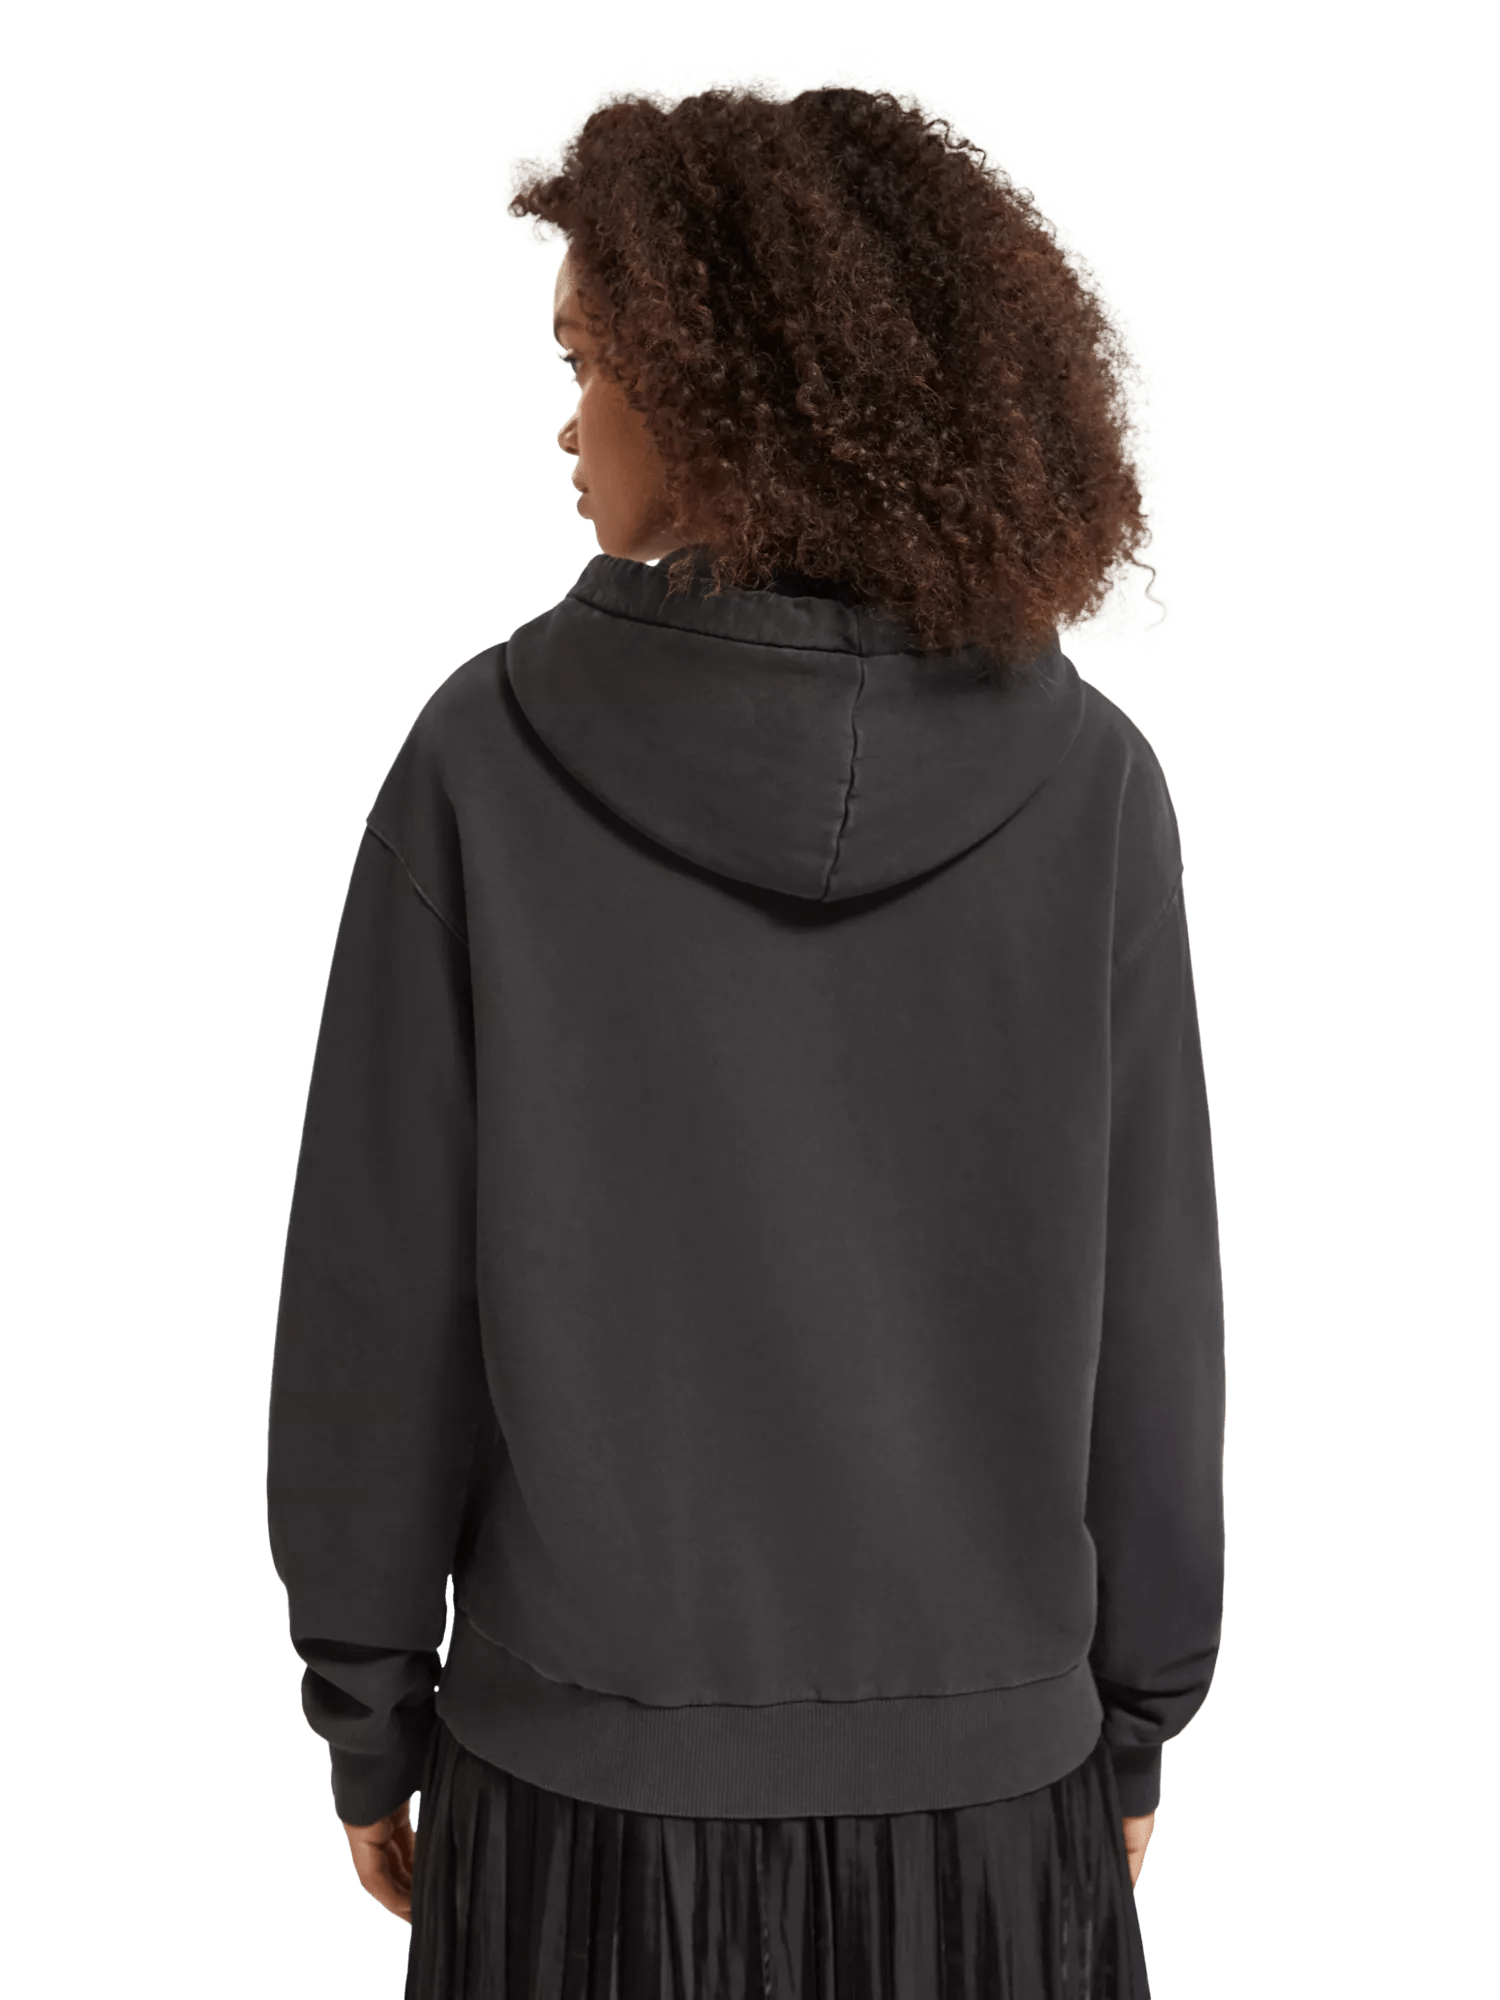 Maison Scotch - Relaxed Fit Graphic Hoodie - Evening Black